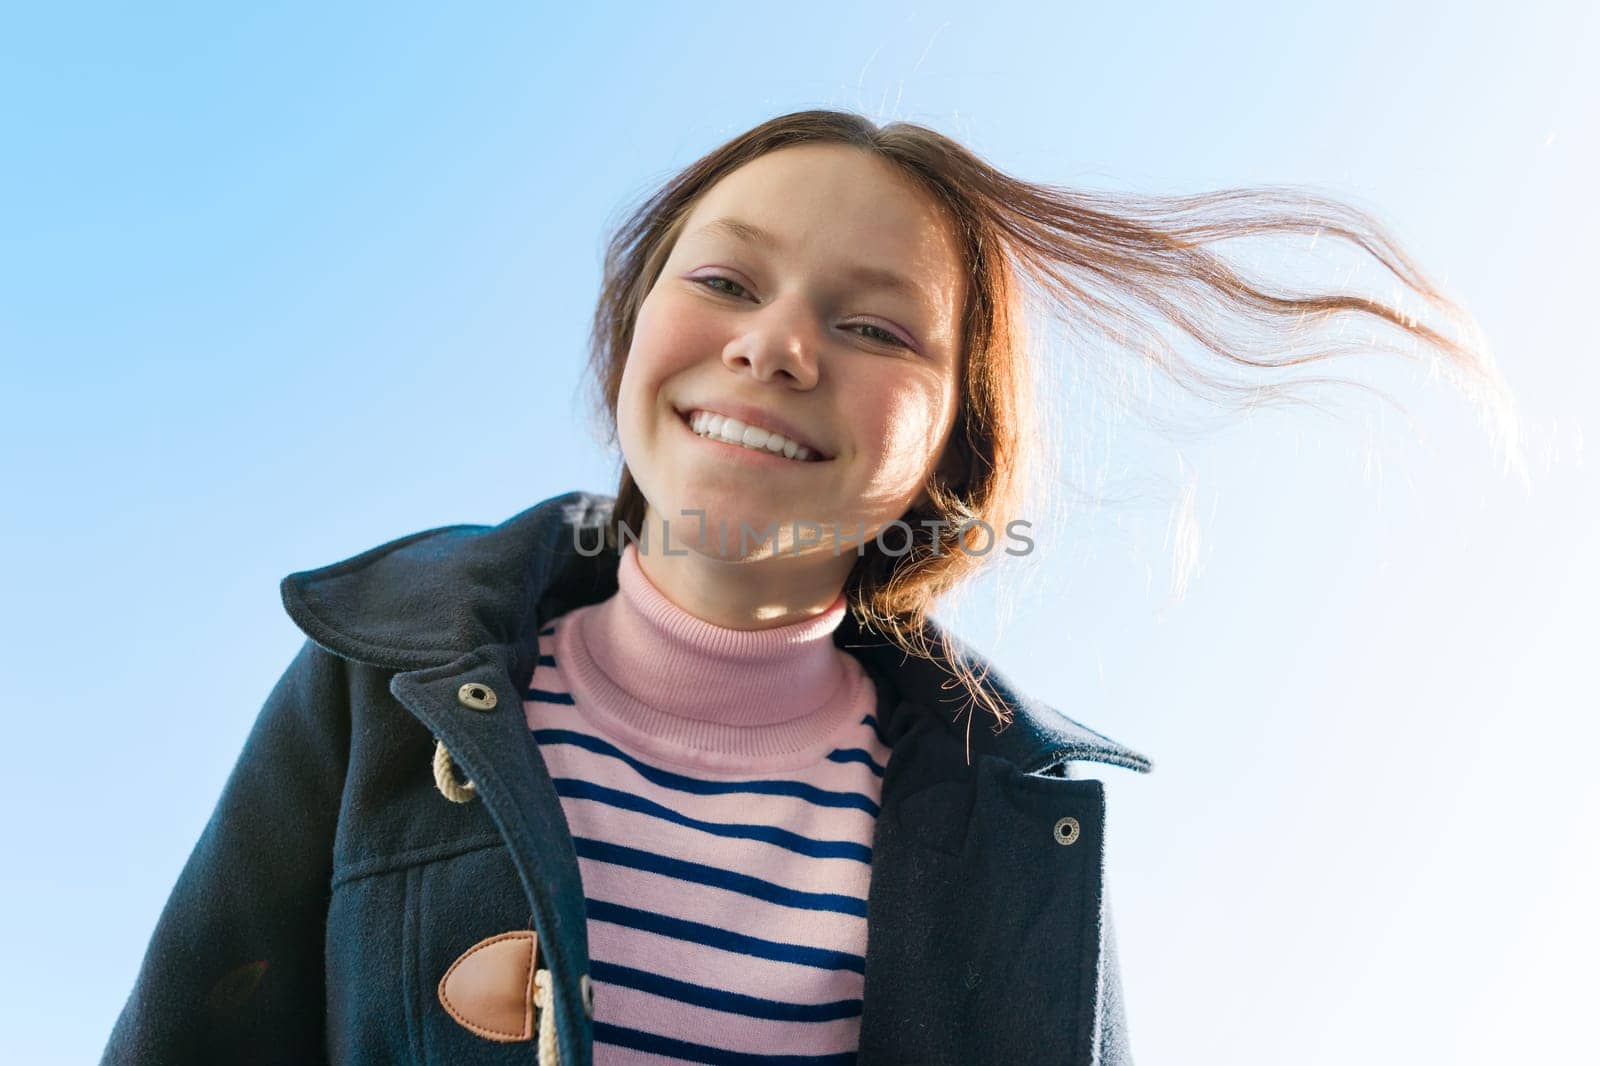 Portrait of a young smiling teen girl, background blue sky by VH-studio